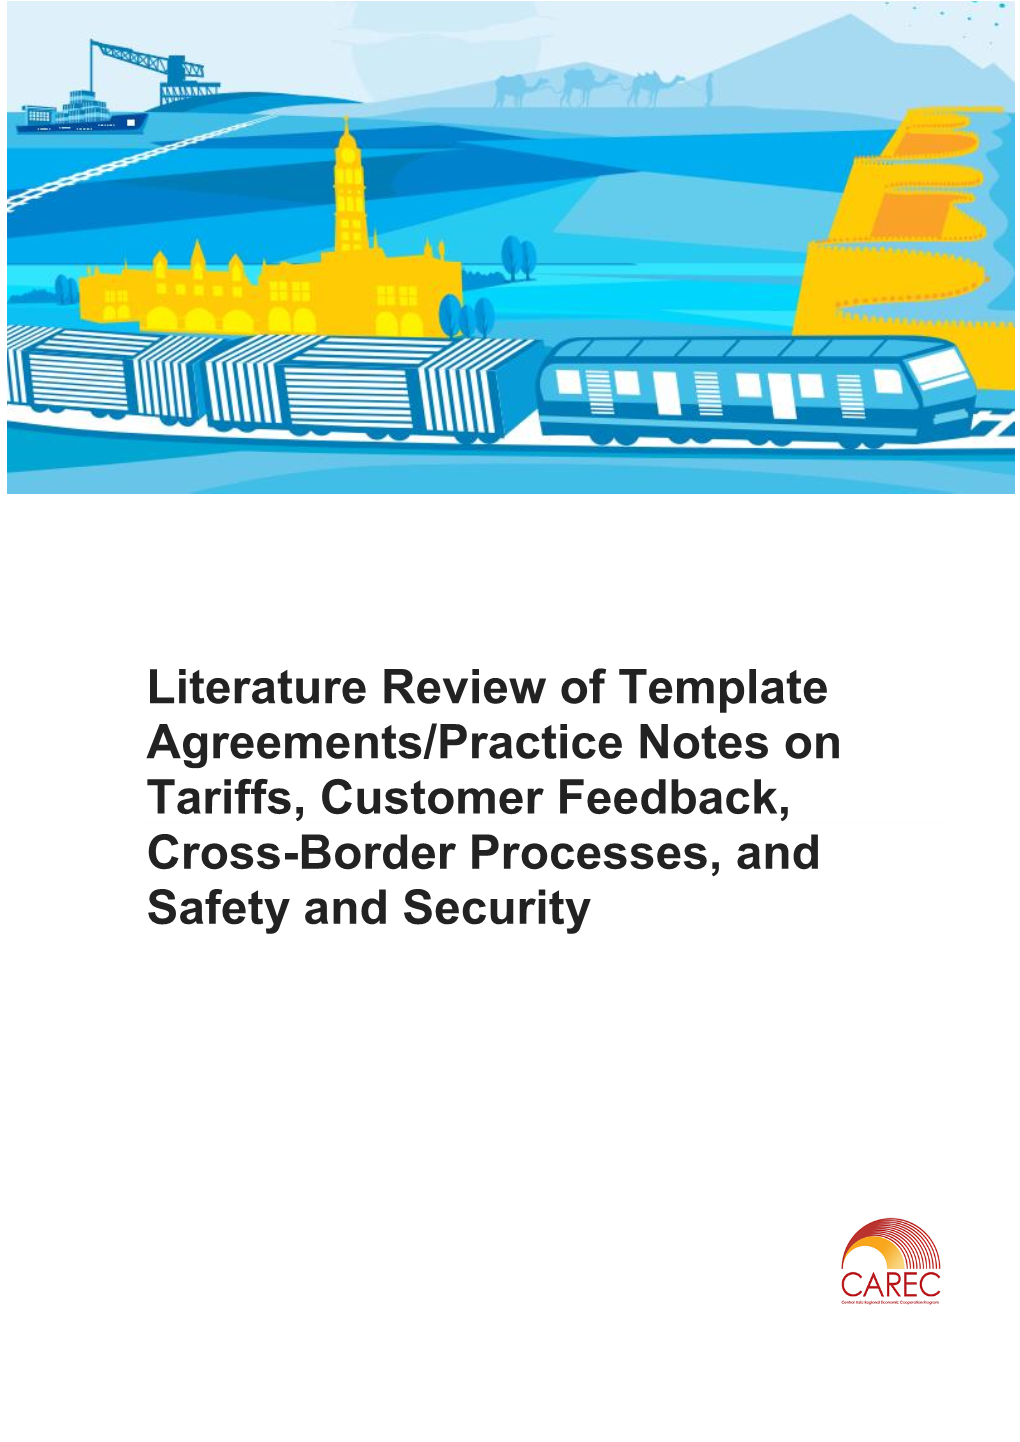 Literature Review of Template Agreements/Practice Notes on Tariffs, Customer Feedback, Cross-Border Processes, and Safety and Security